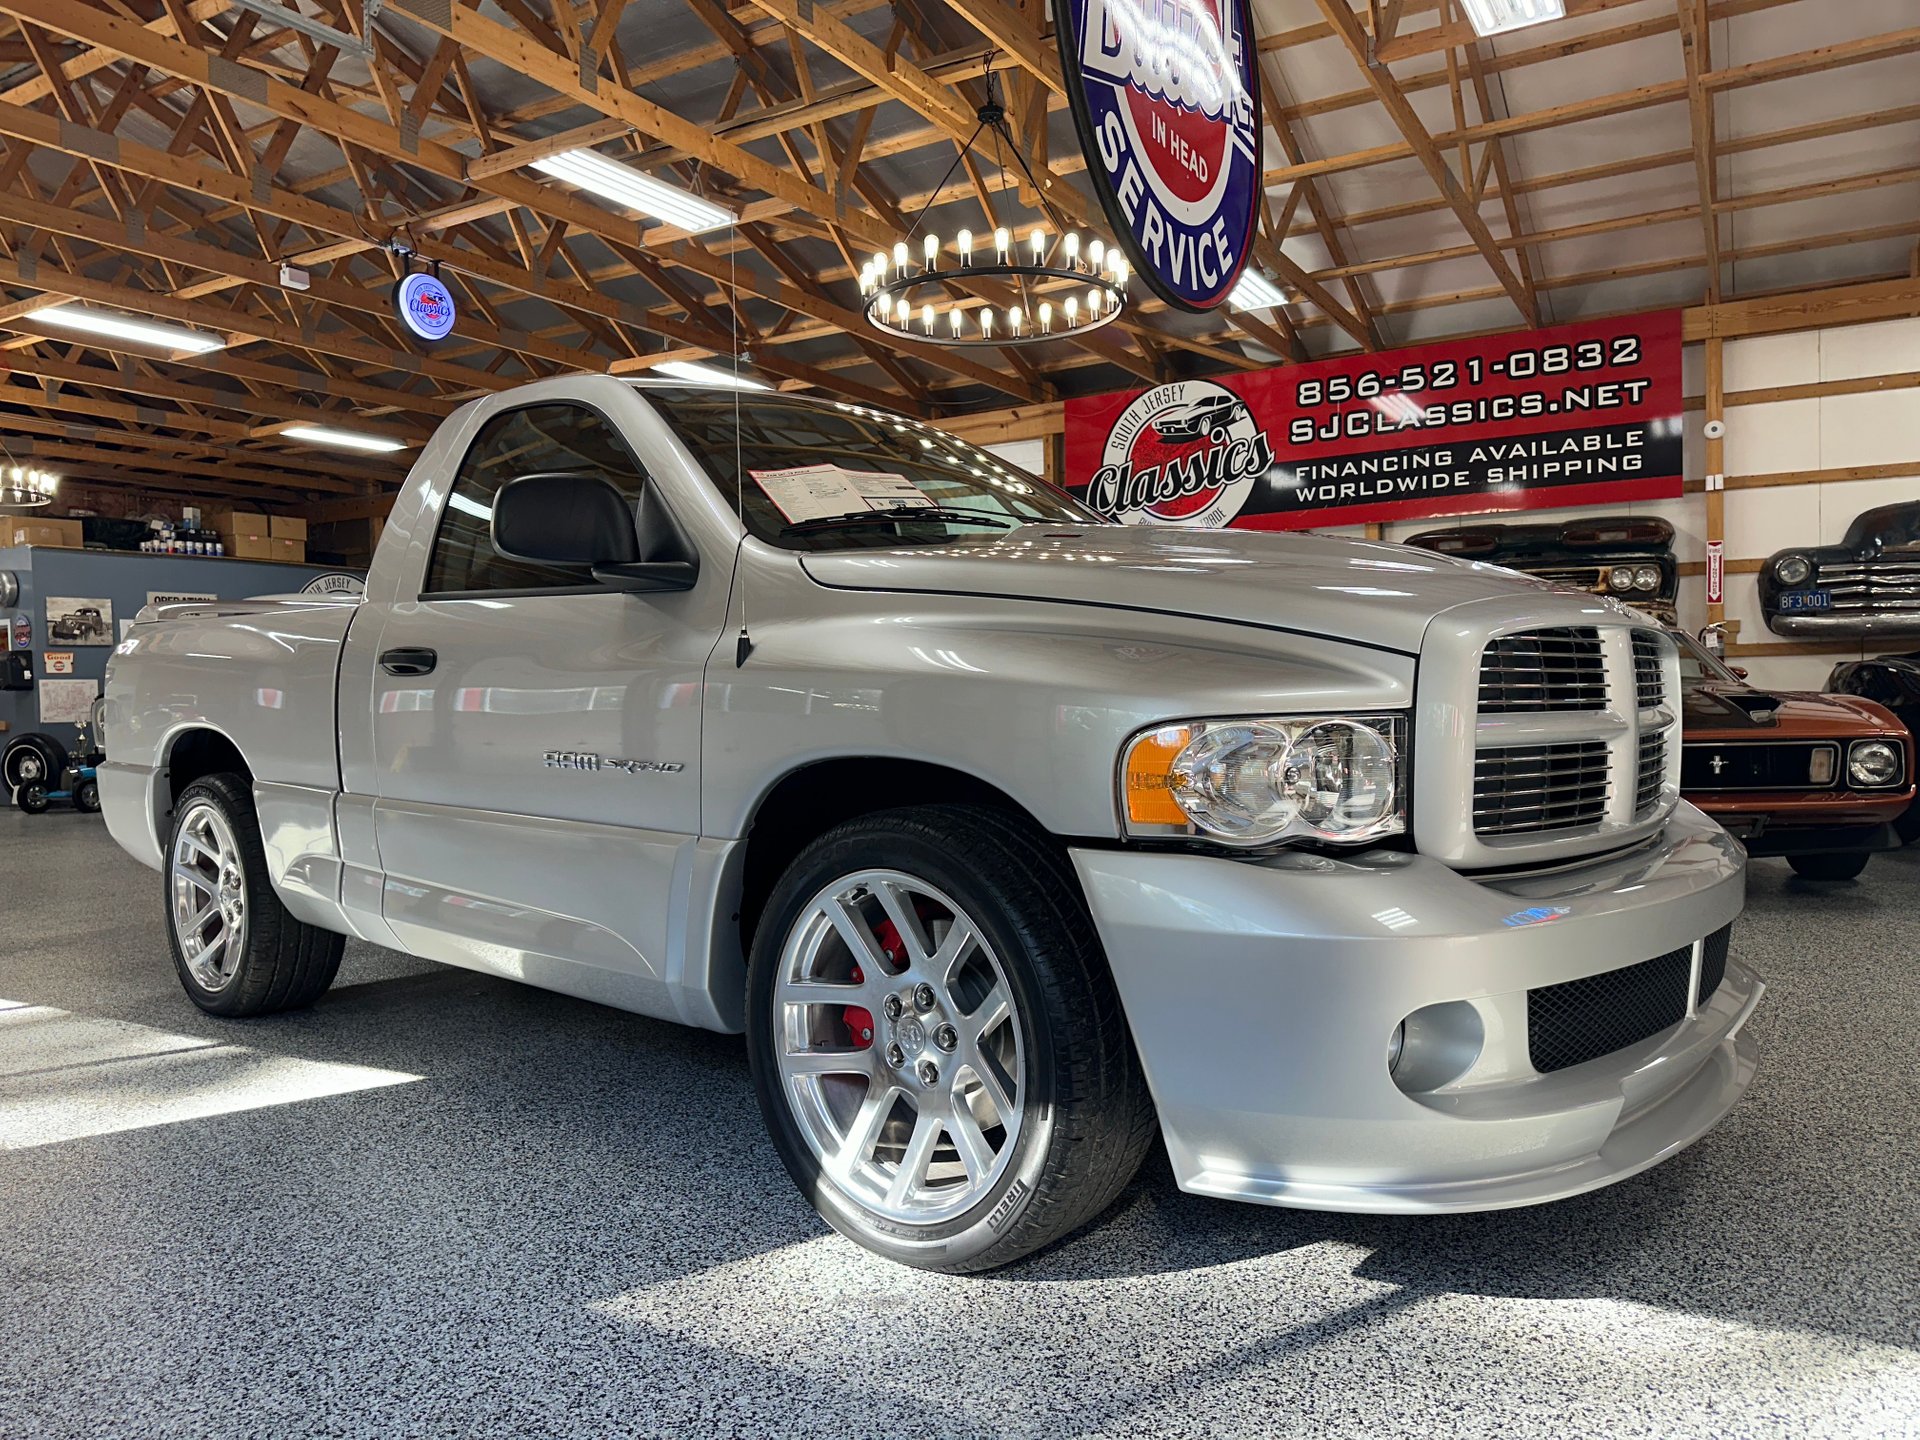 End Of An Era: Ram 1500 Pickup Truck No Longer Comes With A V8